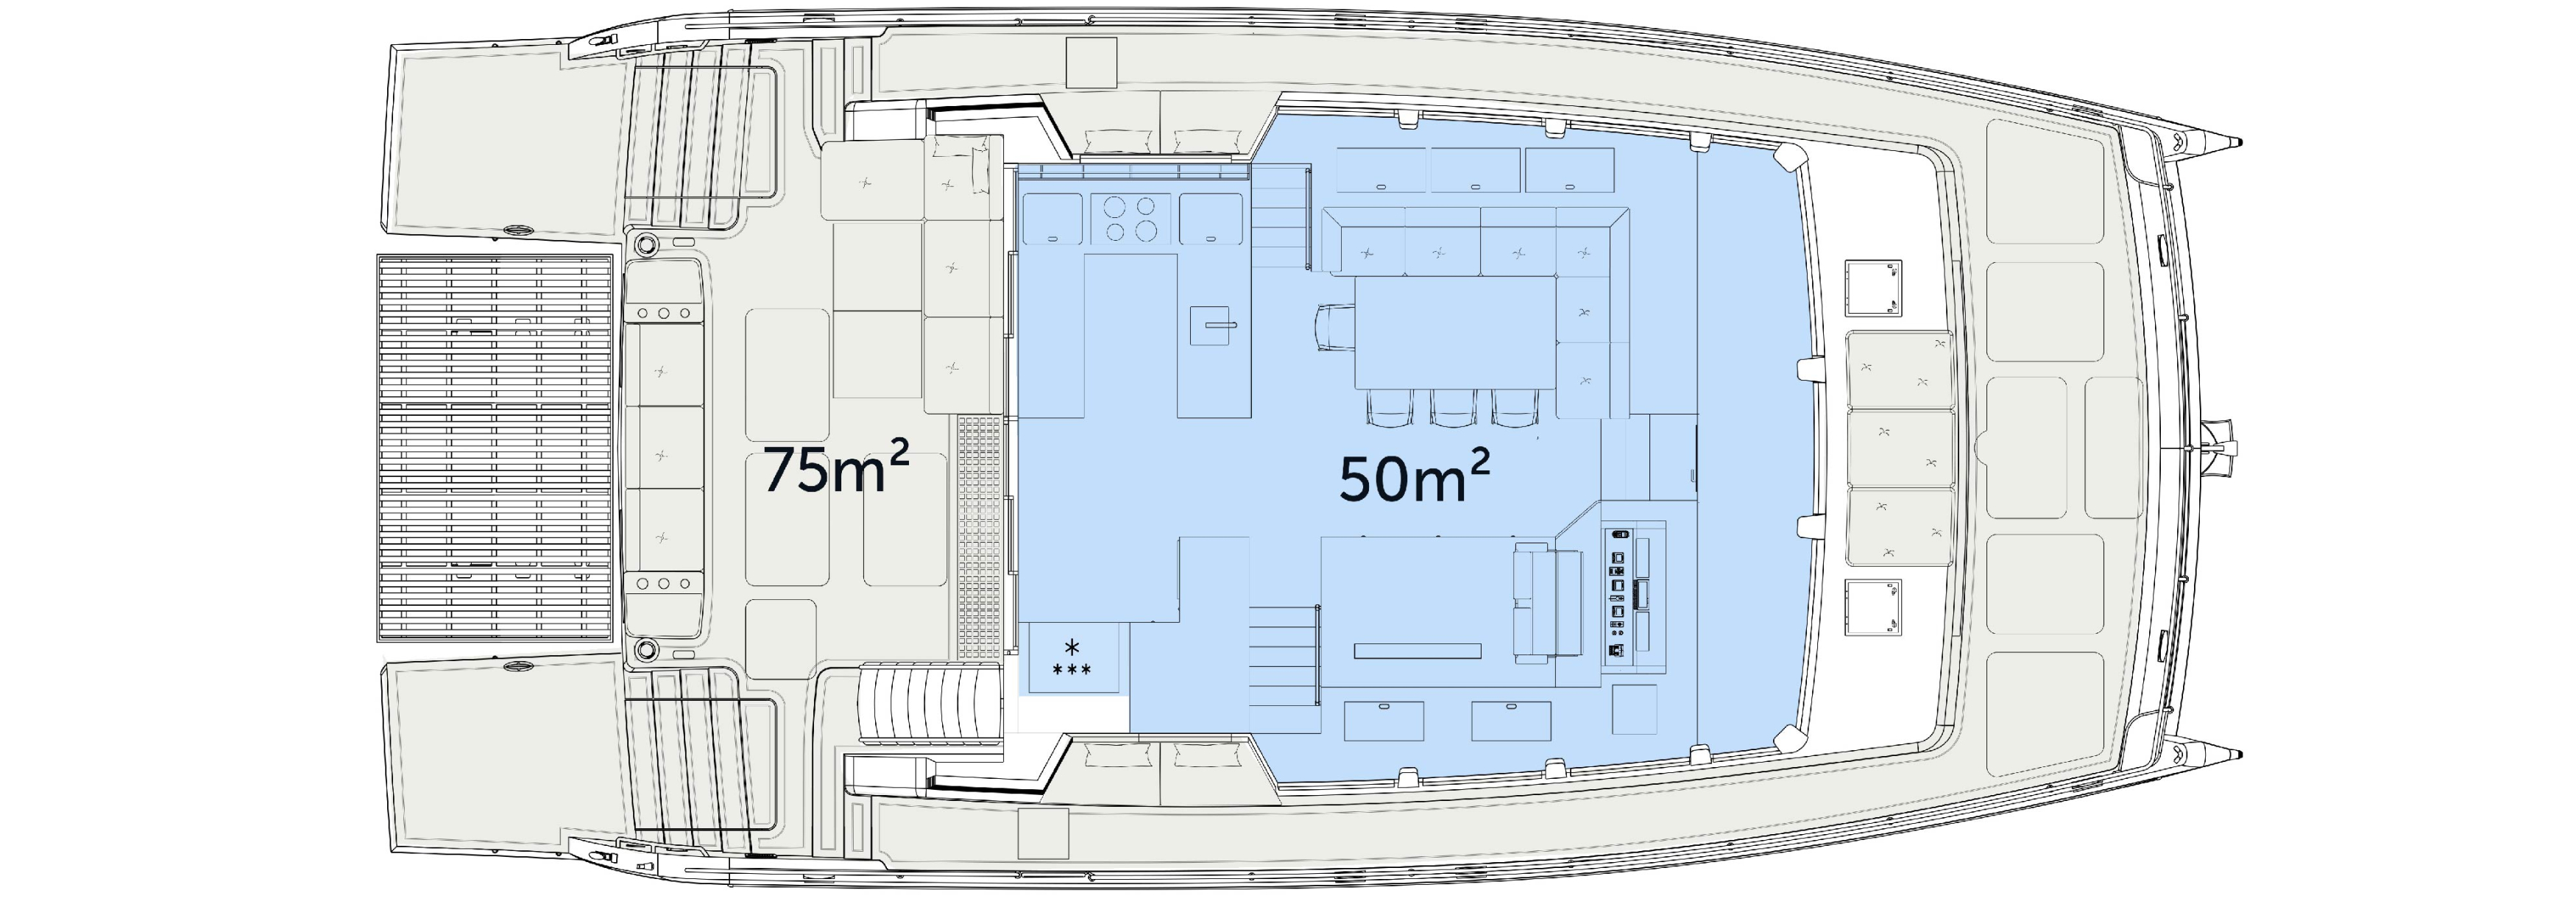 Yacht main deck front master area plan